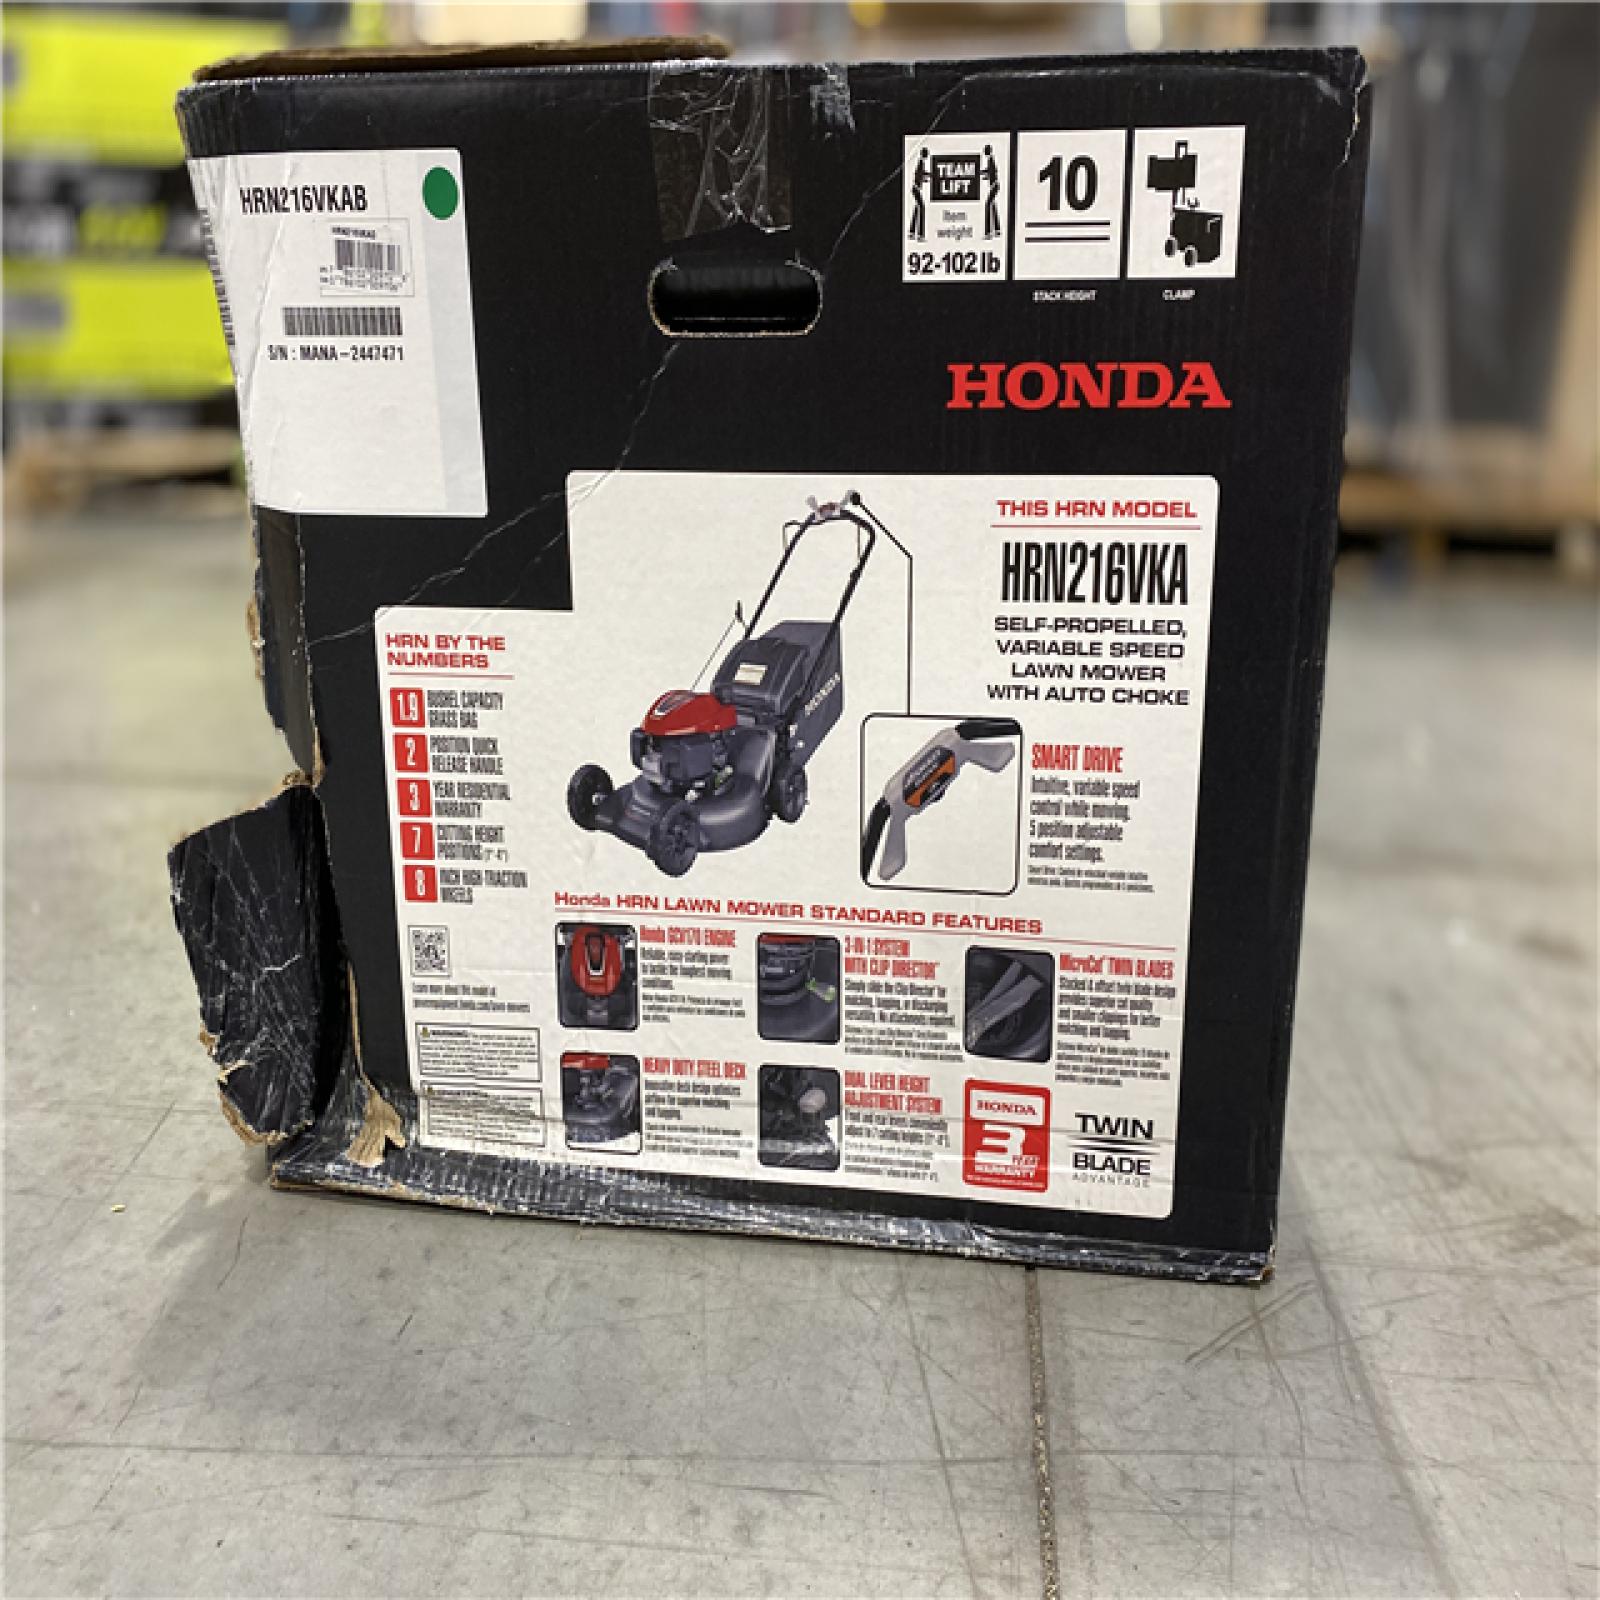 DALLAS LOCATION -  Honda 21 in. 3-in-1 Variable Speed Gas Walk Behind Self-Propelled Lawn Mower with Auto Choke